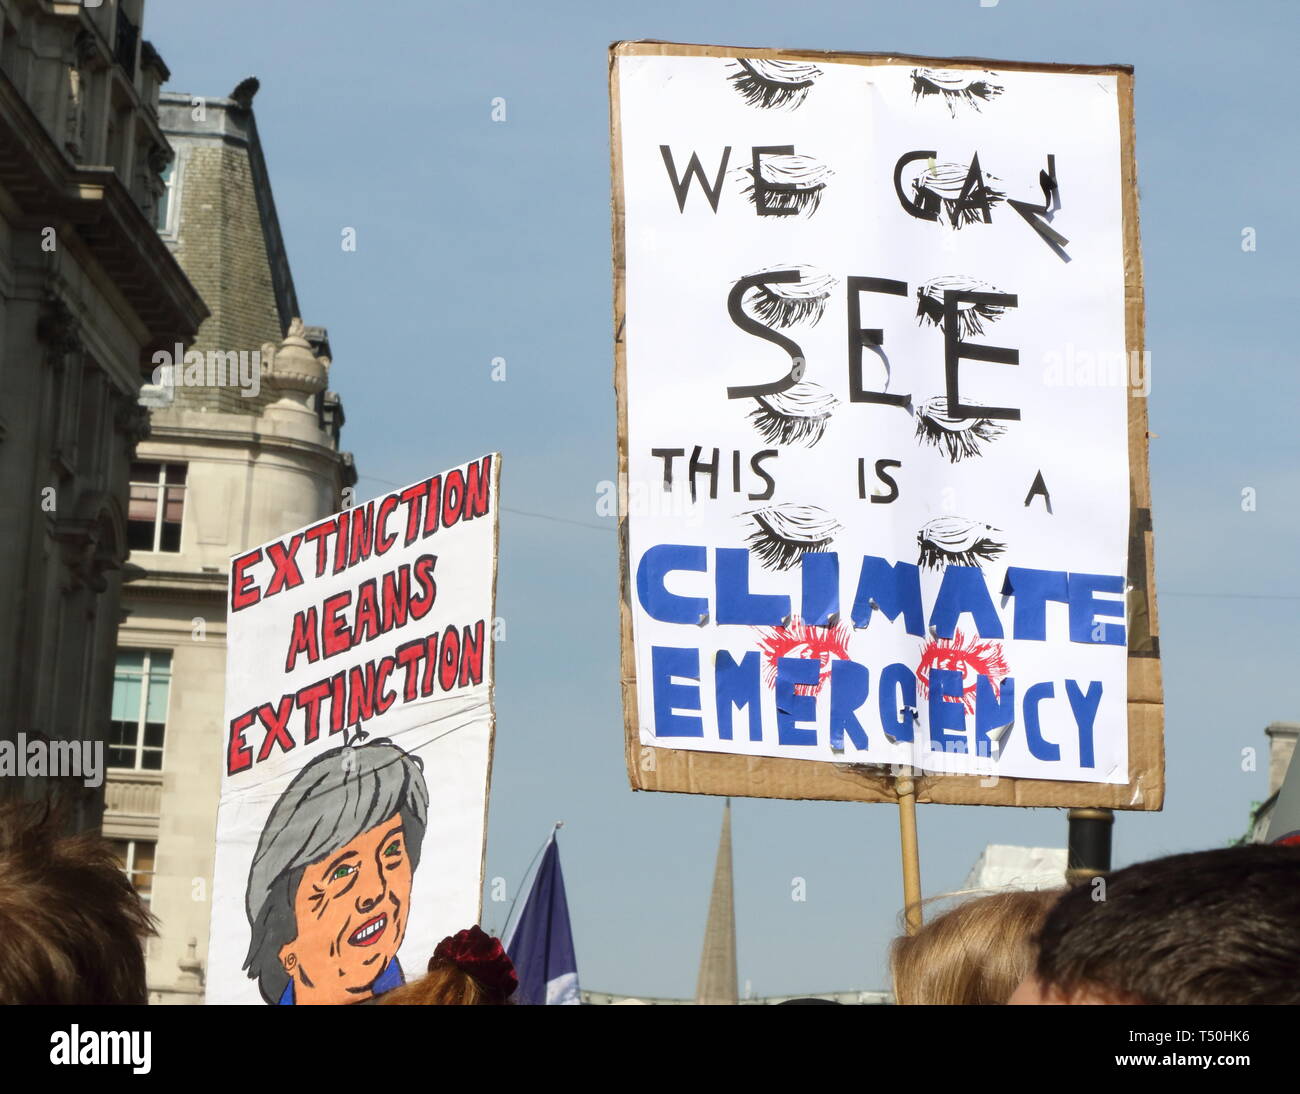 Climate placard seen during the demonstration. Environmental activists from Extinction Rebellion movement occupy London's Oxford Circus for a 5th day. Activists parked a pink boat in the middle of the busy Oxford Circus road junction blocking the streets and causing traffic chaos. Stock Photo